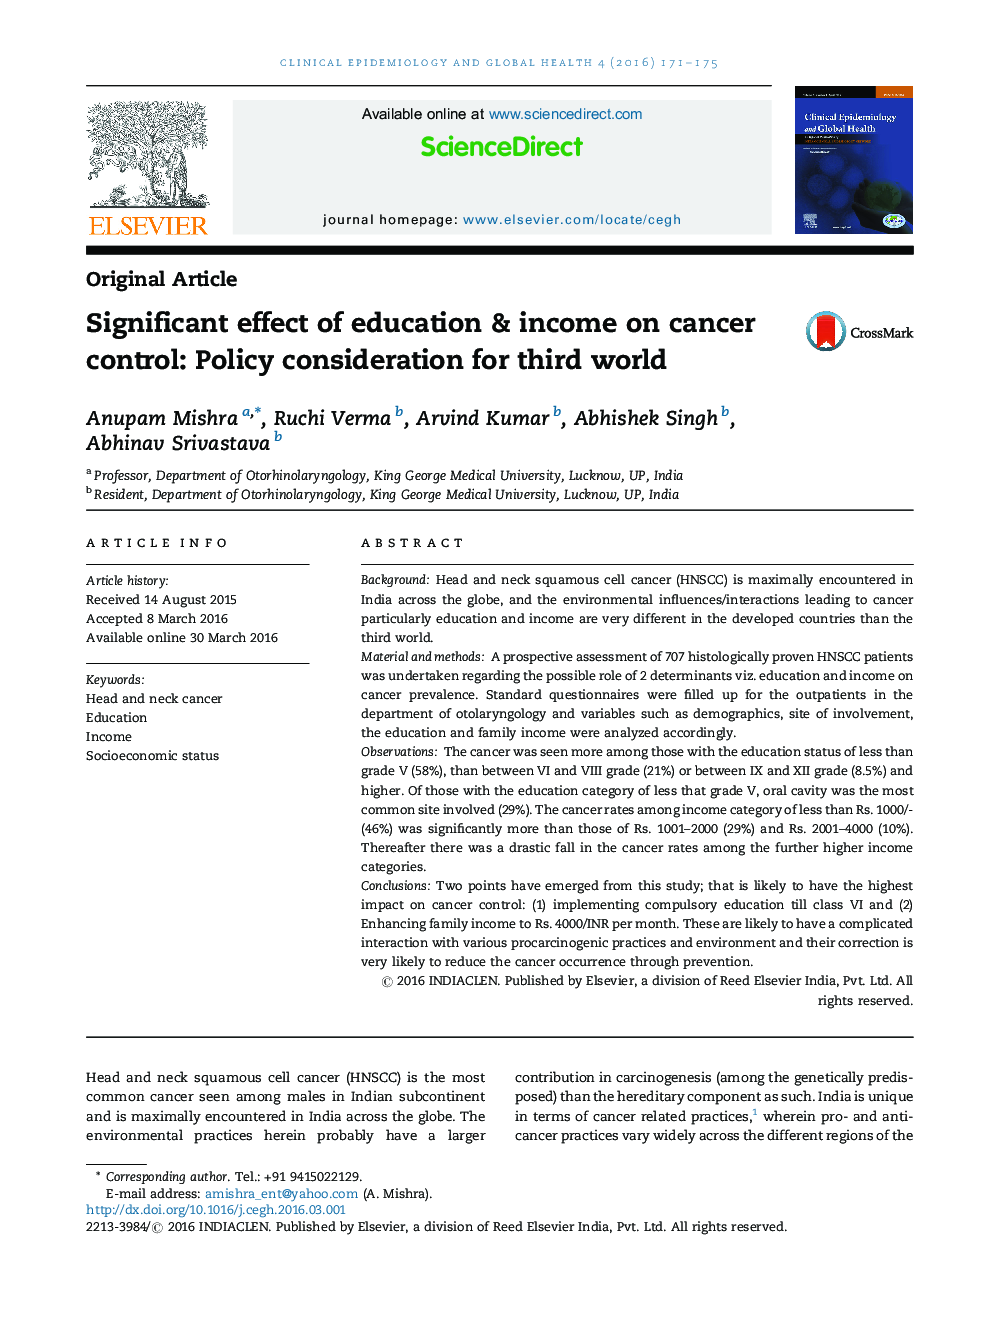 Significant effect of education & income on cancer control: Policy consideration for third world